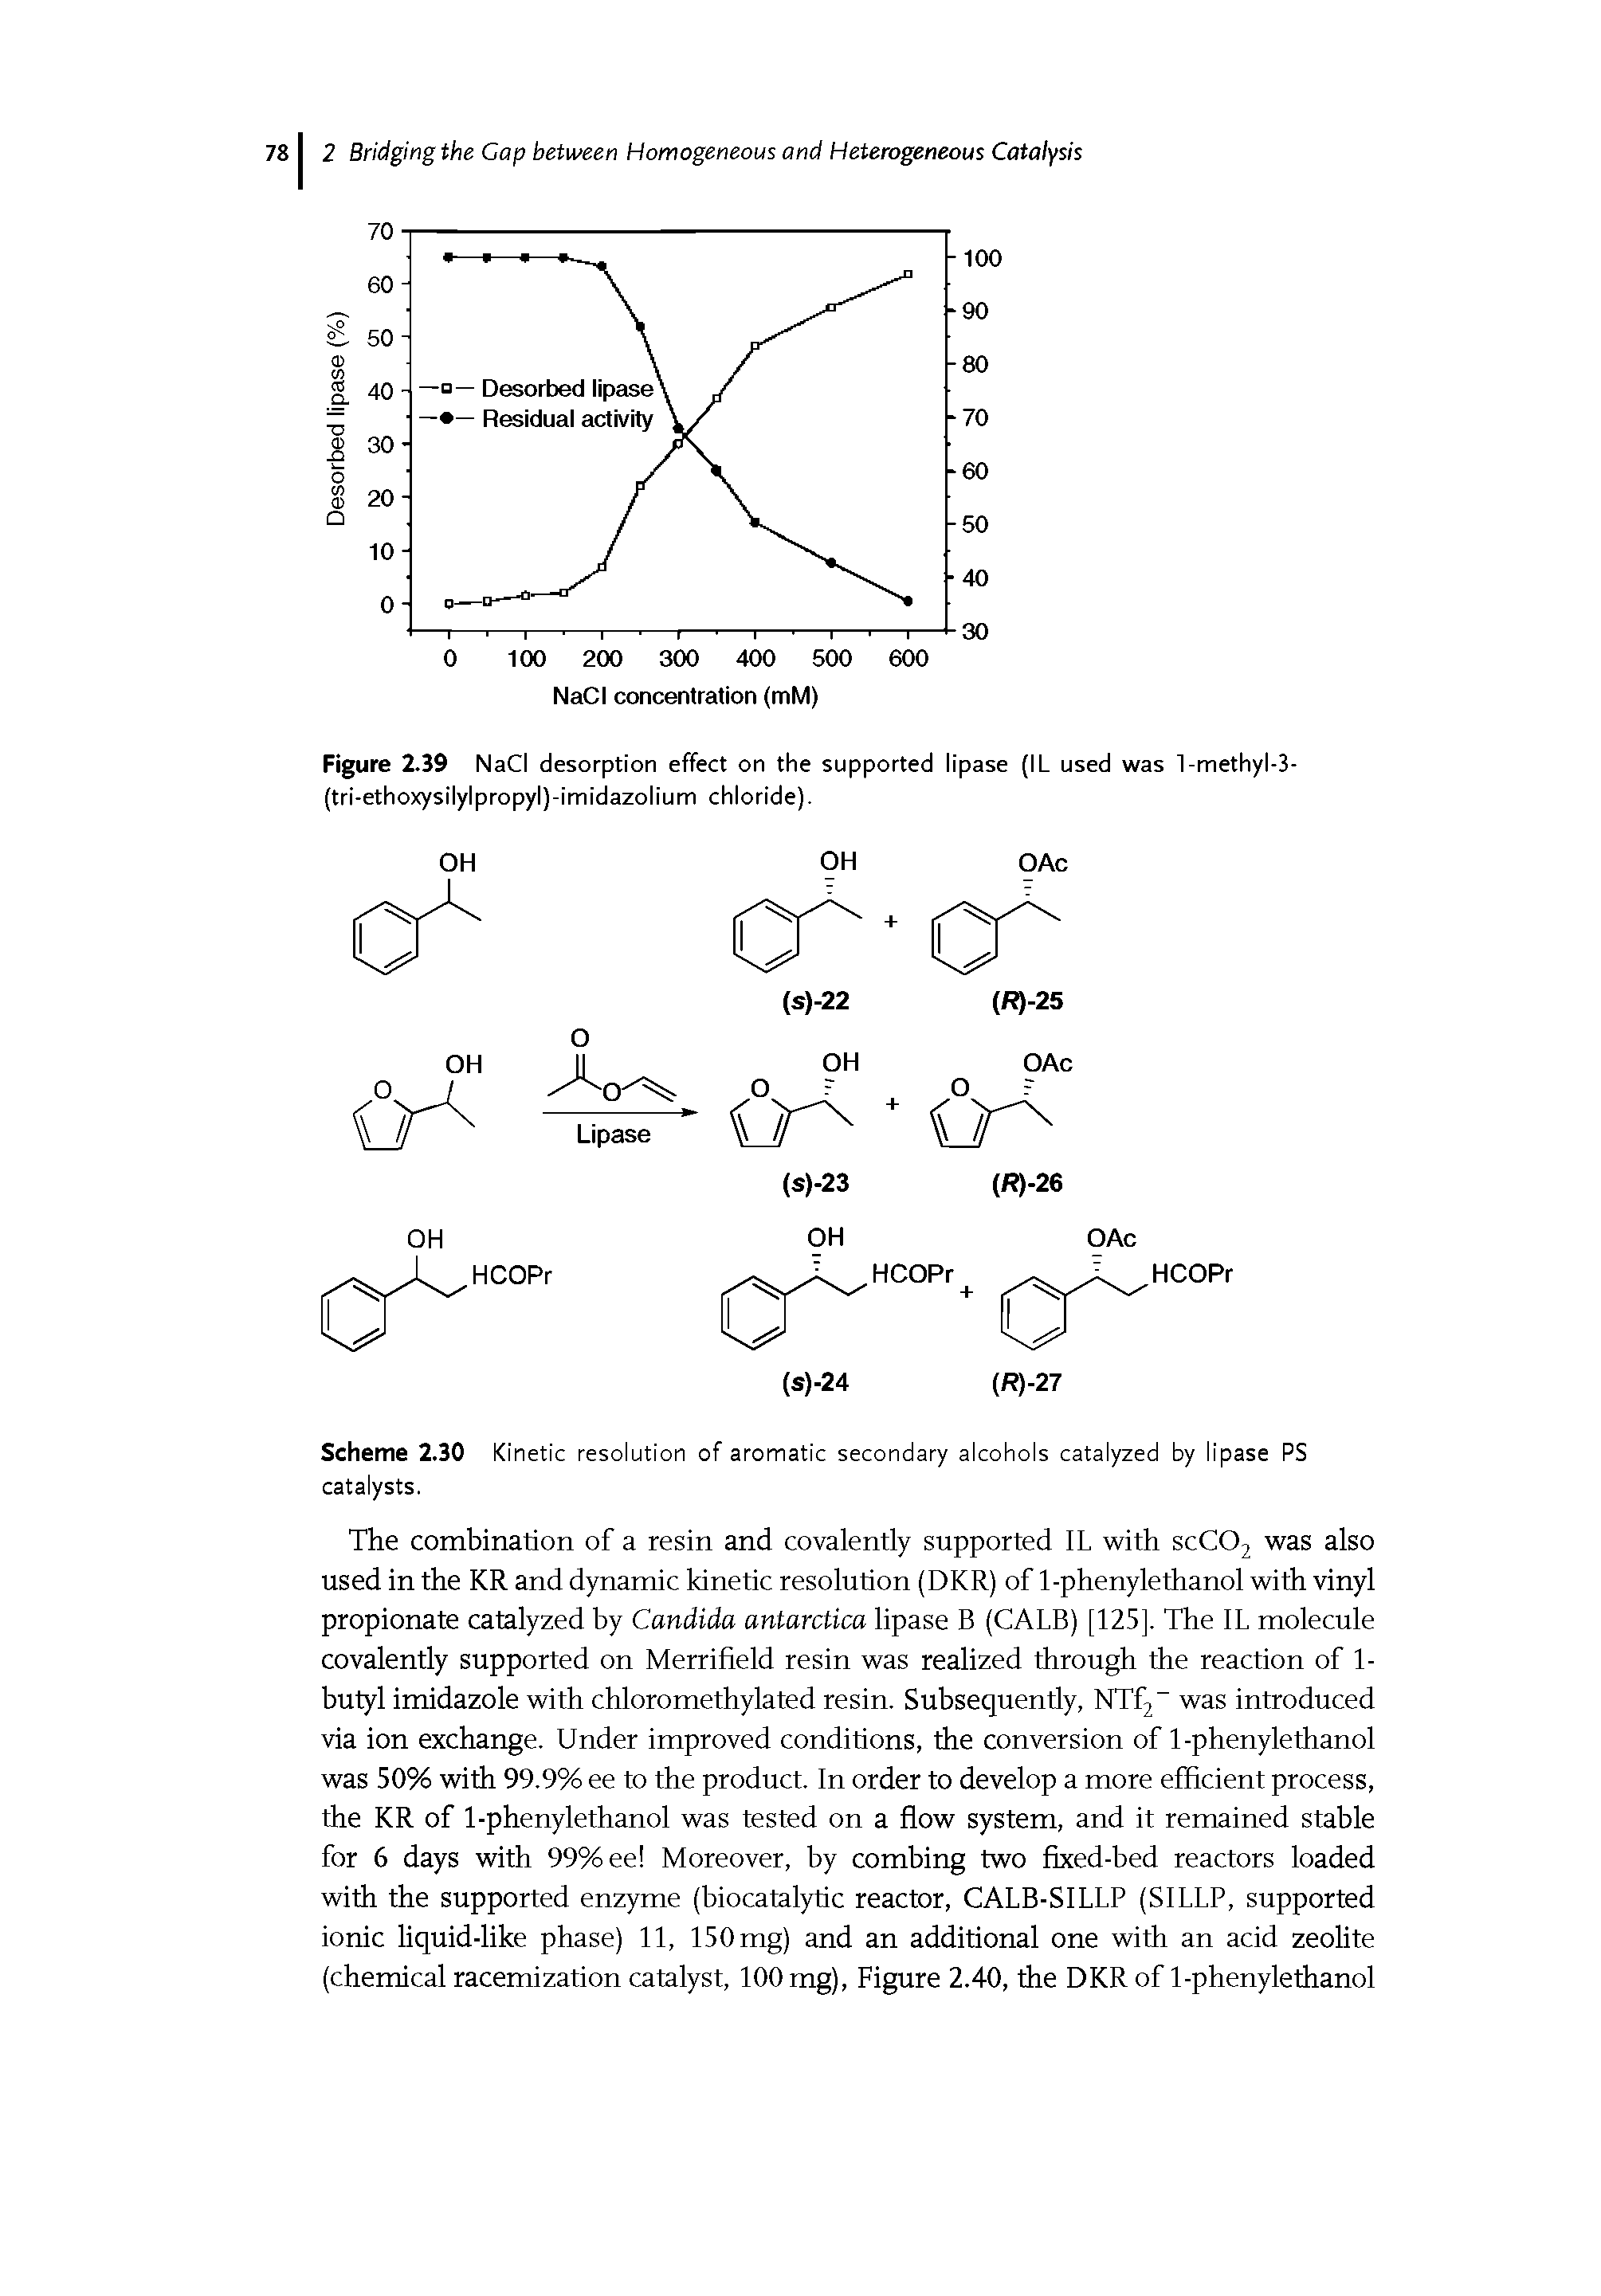 Scheme 2.30 Kinetic resolution of aromatic secondary alcohols catalyzed by lipase PS catalysts.